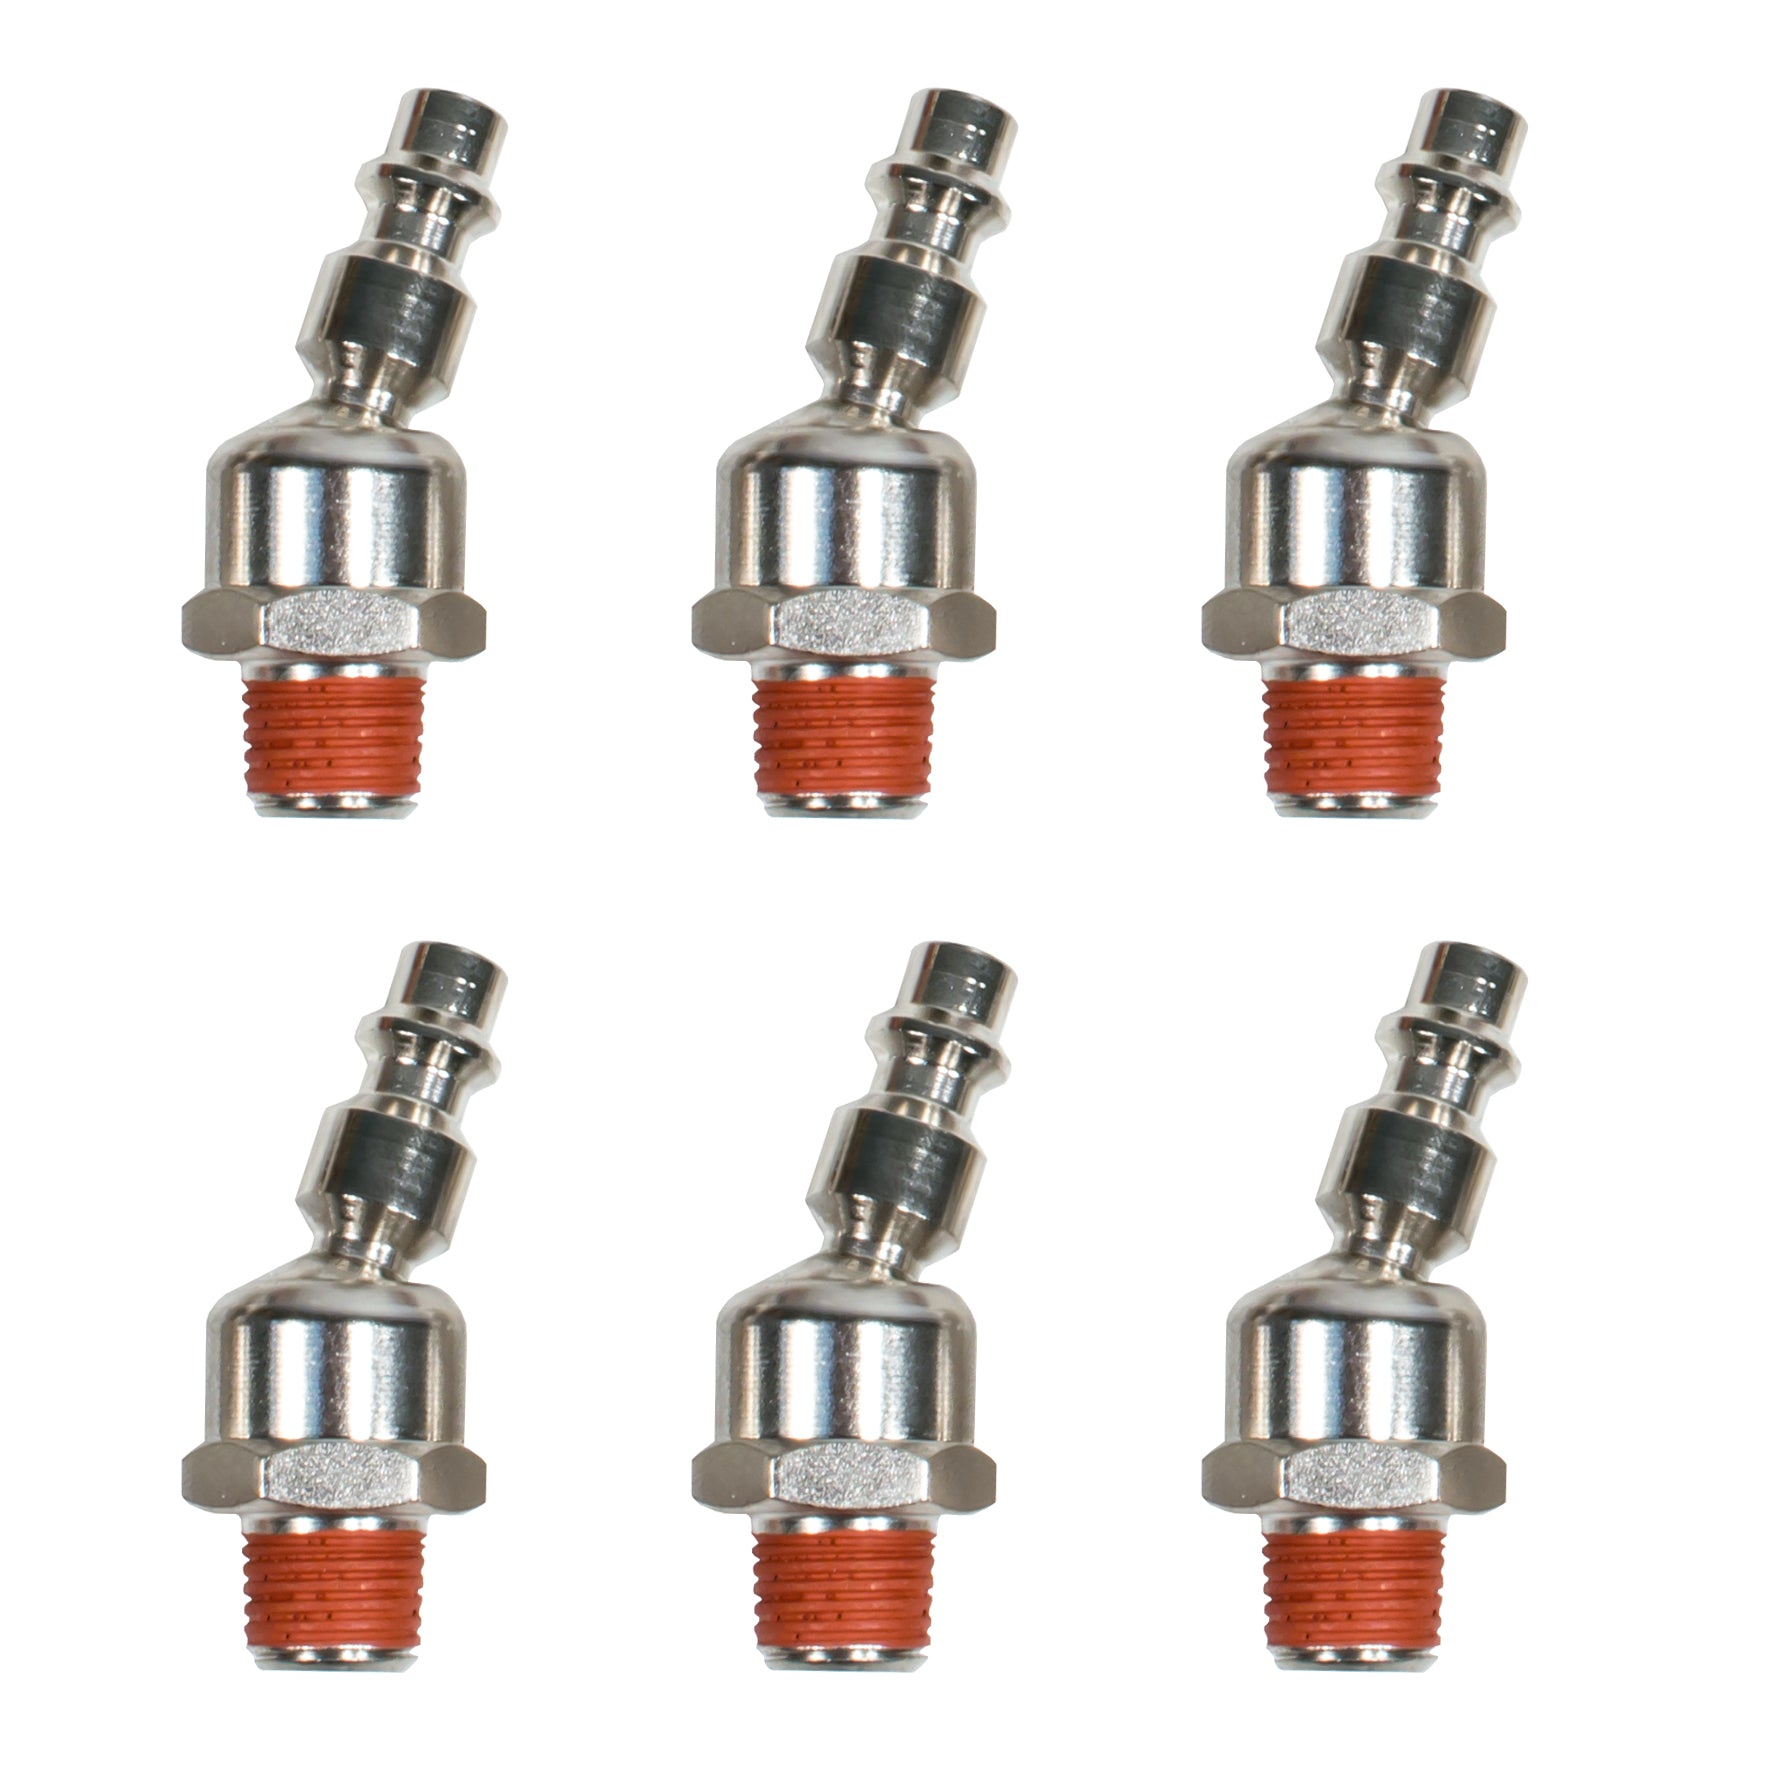 Industrial Swivel 1/4' NPT male Quick Connect Air Tool Fittings - 6 Pack